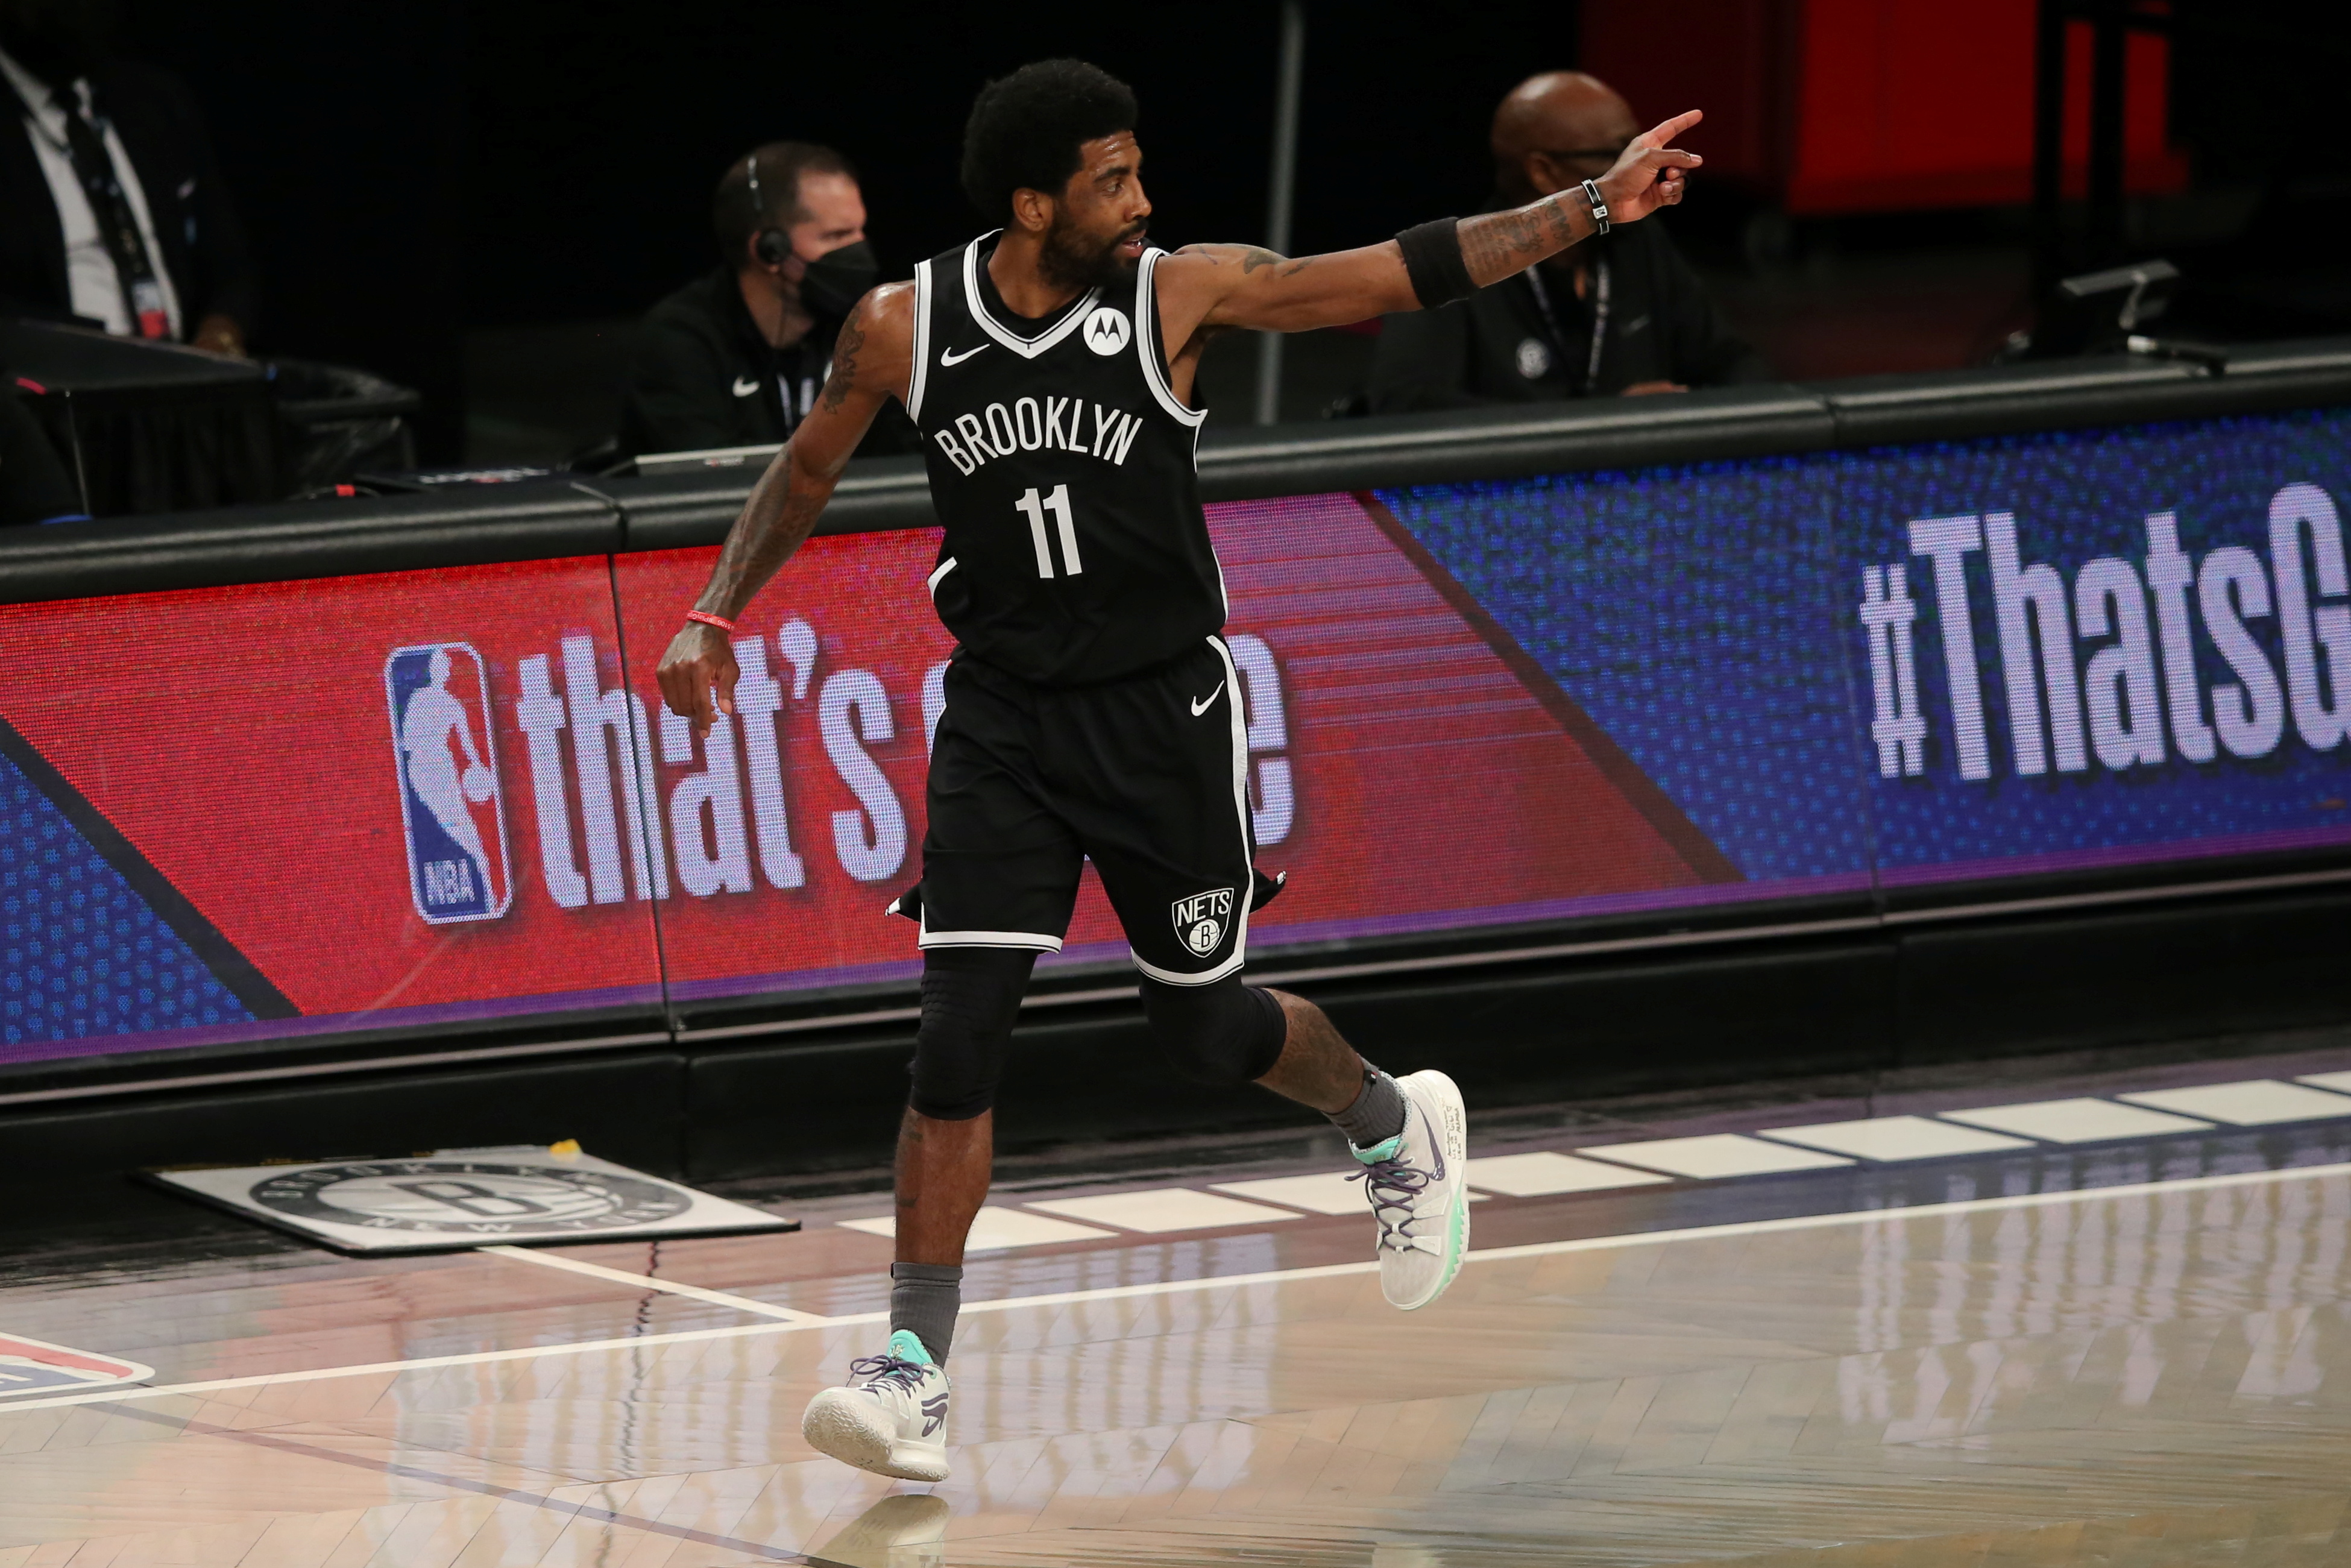 Nets say Kyrie Irving won't return until he receives COVID-19